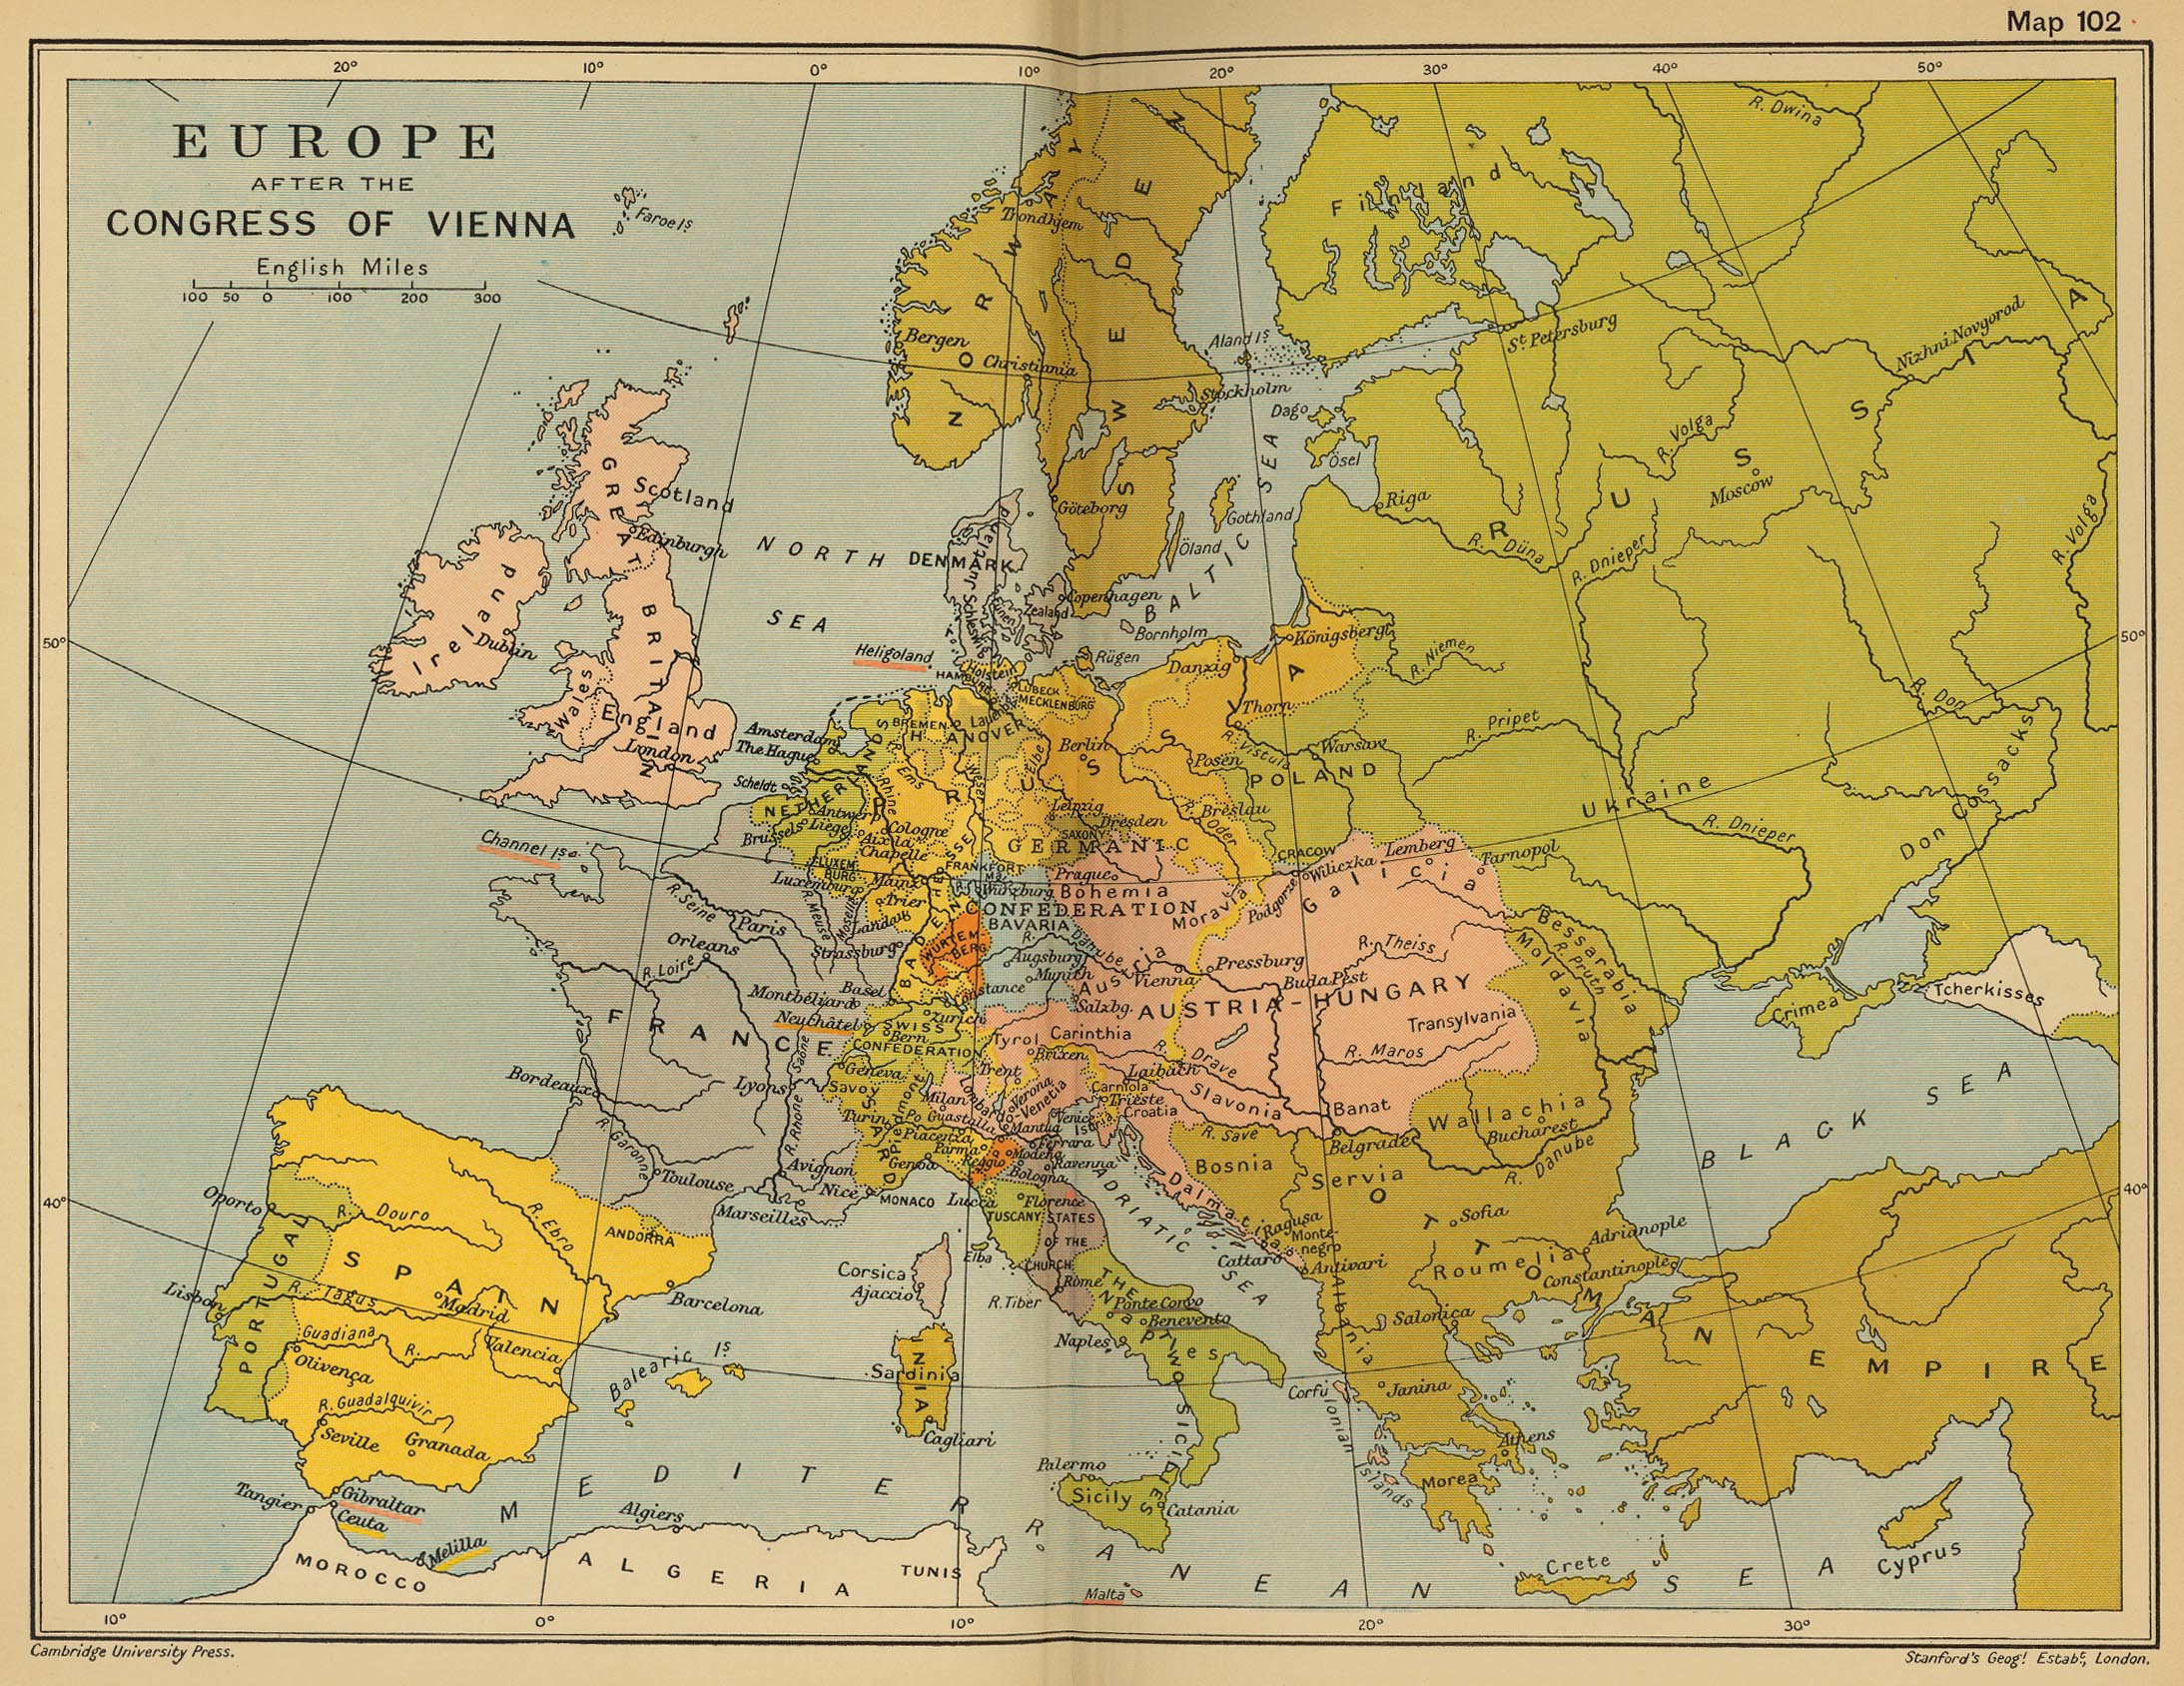 Map of Europe after the Congress of Vienna 1815